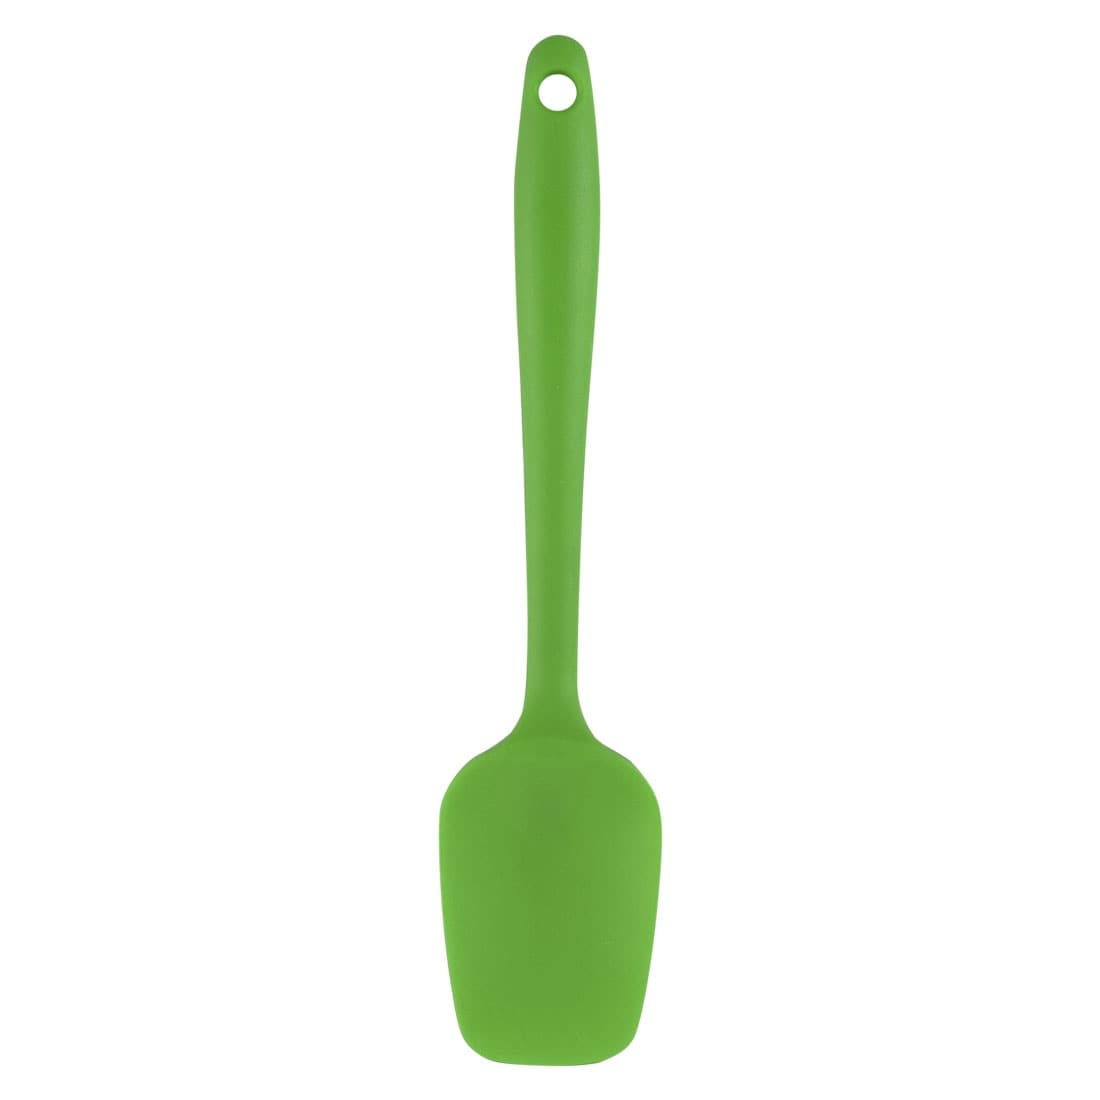 https://ak1.ostkcdn.com/images/products/is/images/direct/3bb43e31b033b51de40f3c393a0908f98d175441/Silicone-Spatula-Heat-Resistant-Home-Kitchen-Turner-Non-Stick-Spatula-for-Bar-Cooking-Baking-Green.jpg